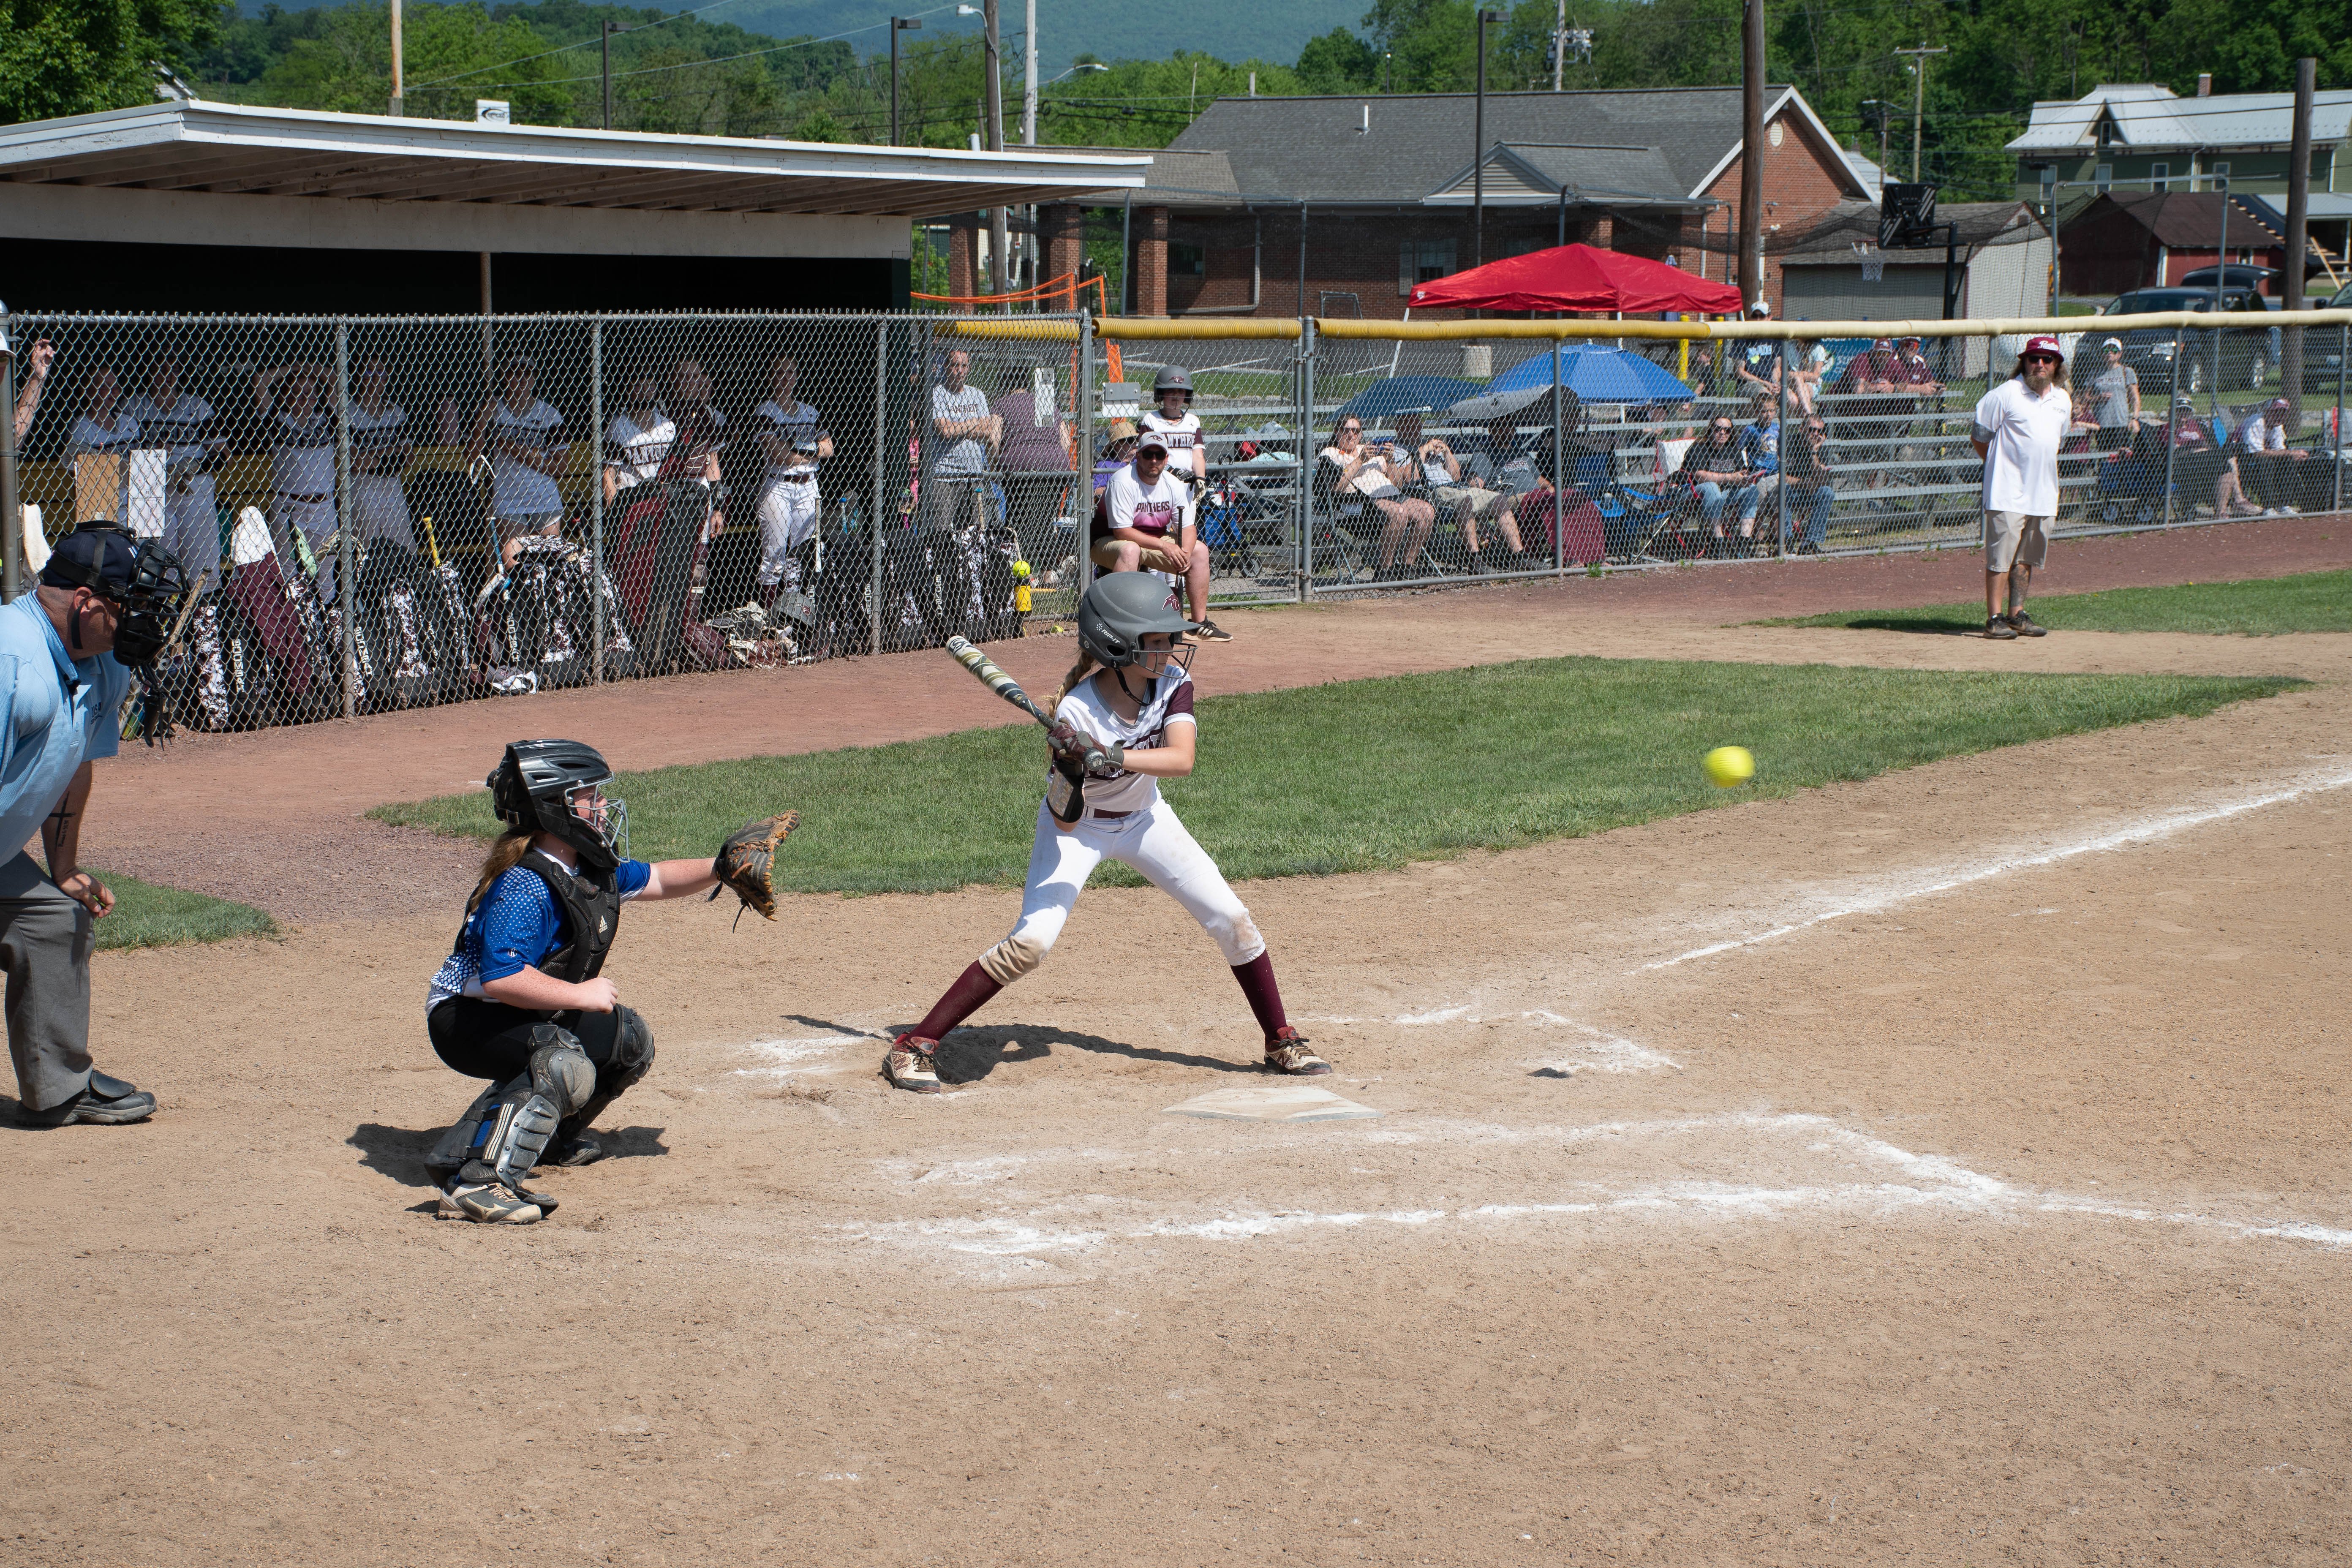 Catcher and batter, who is mid-swing about to hit the ball.